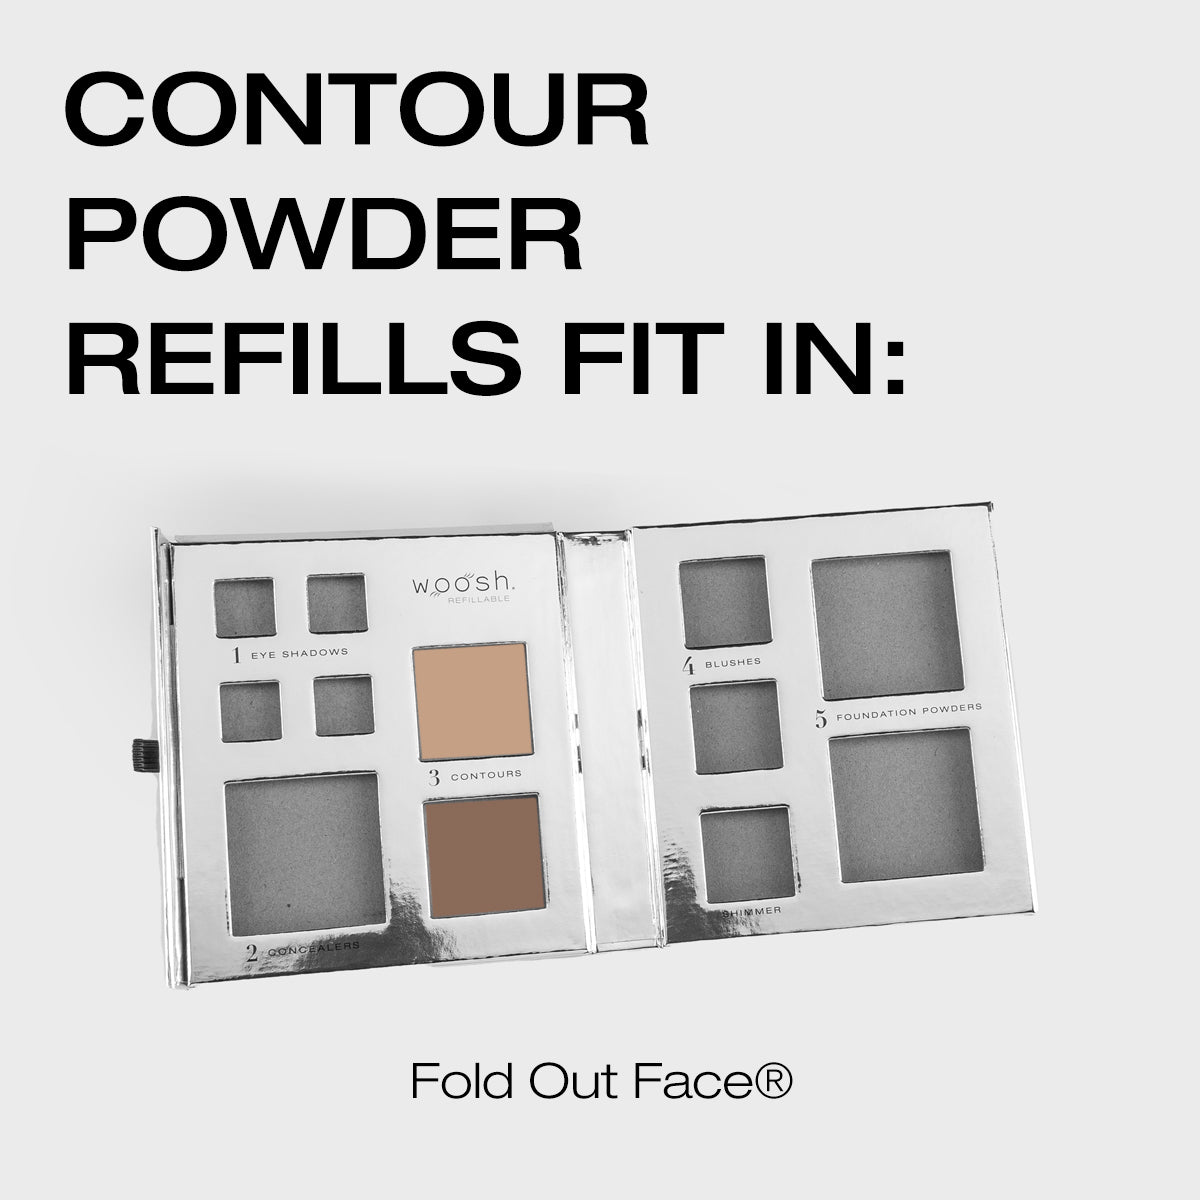 Demo of how the contour powder fits in the fold out face